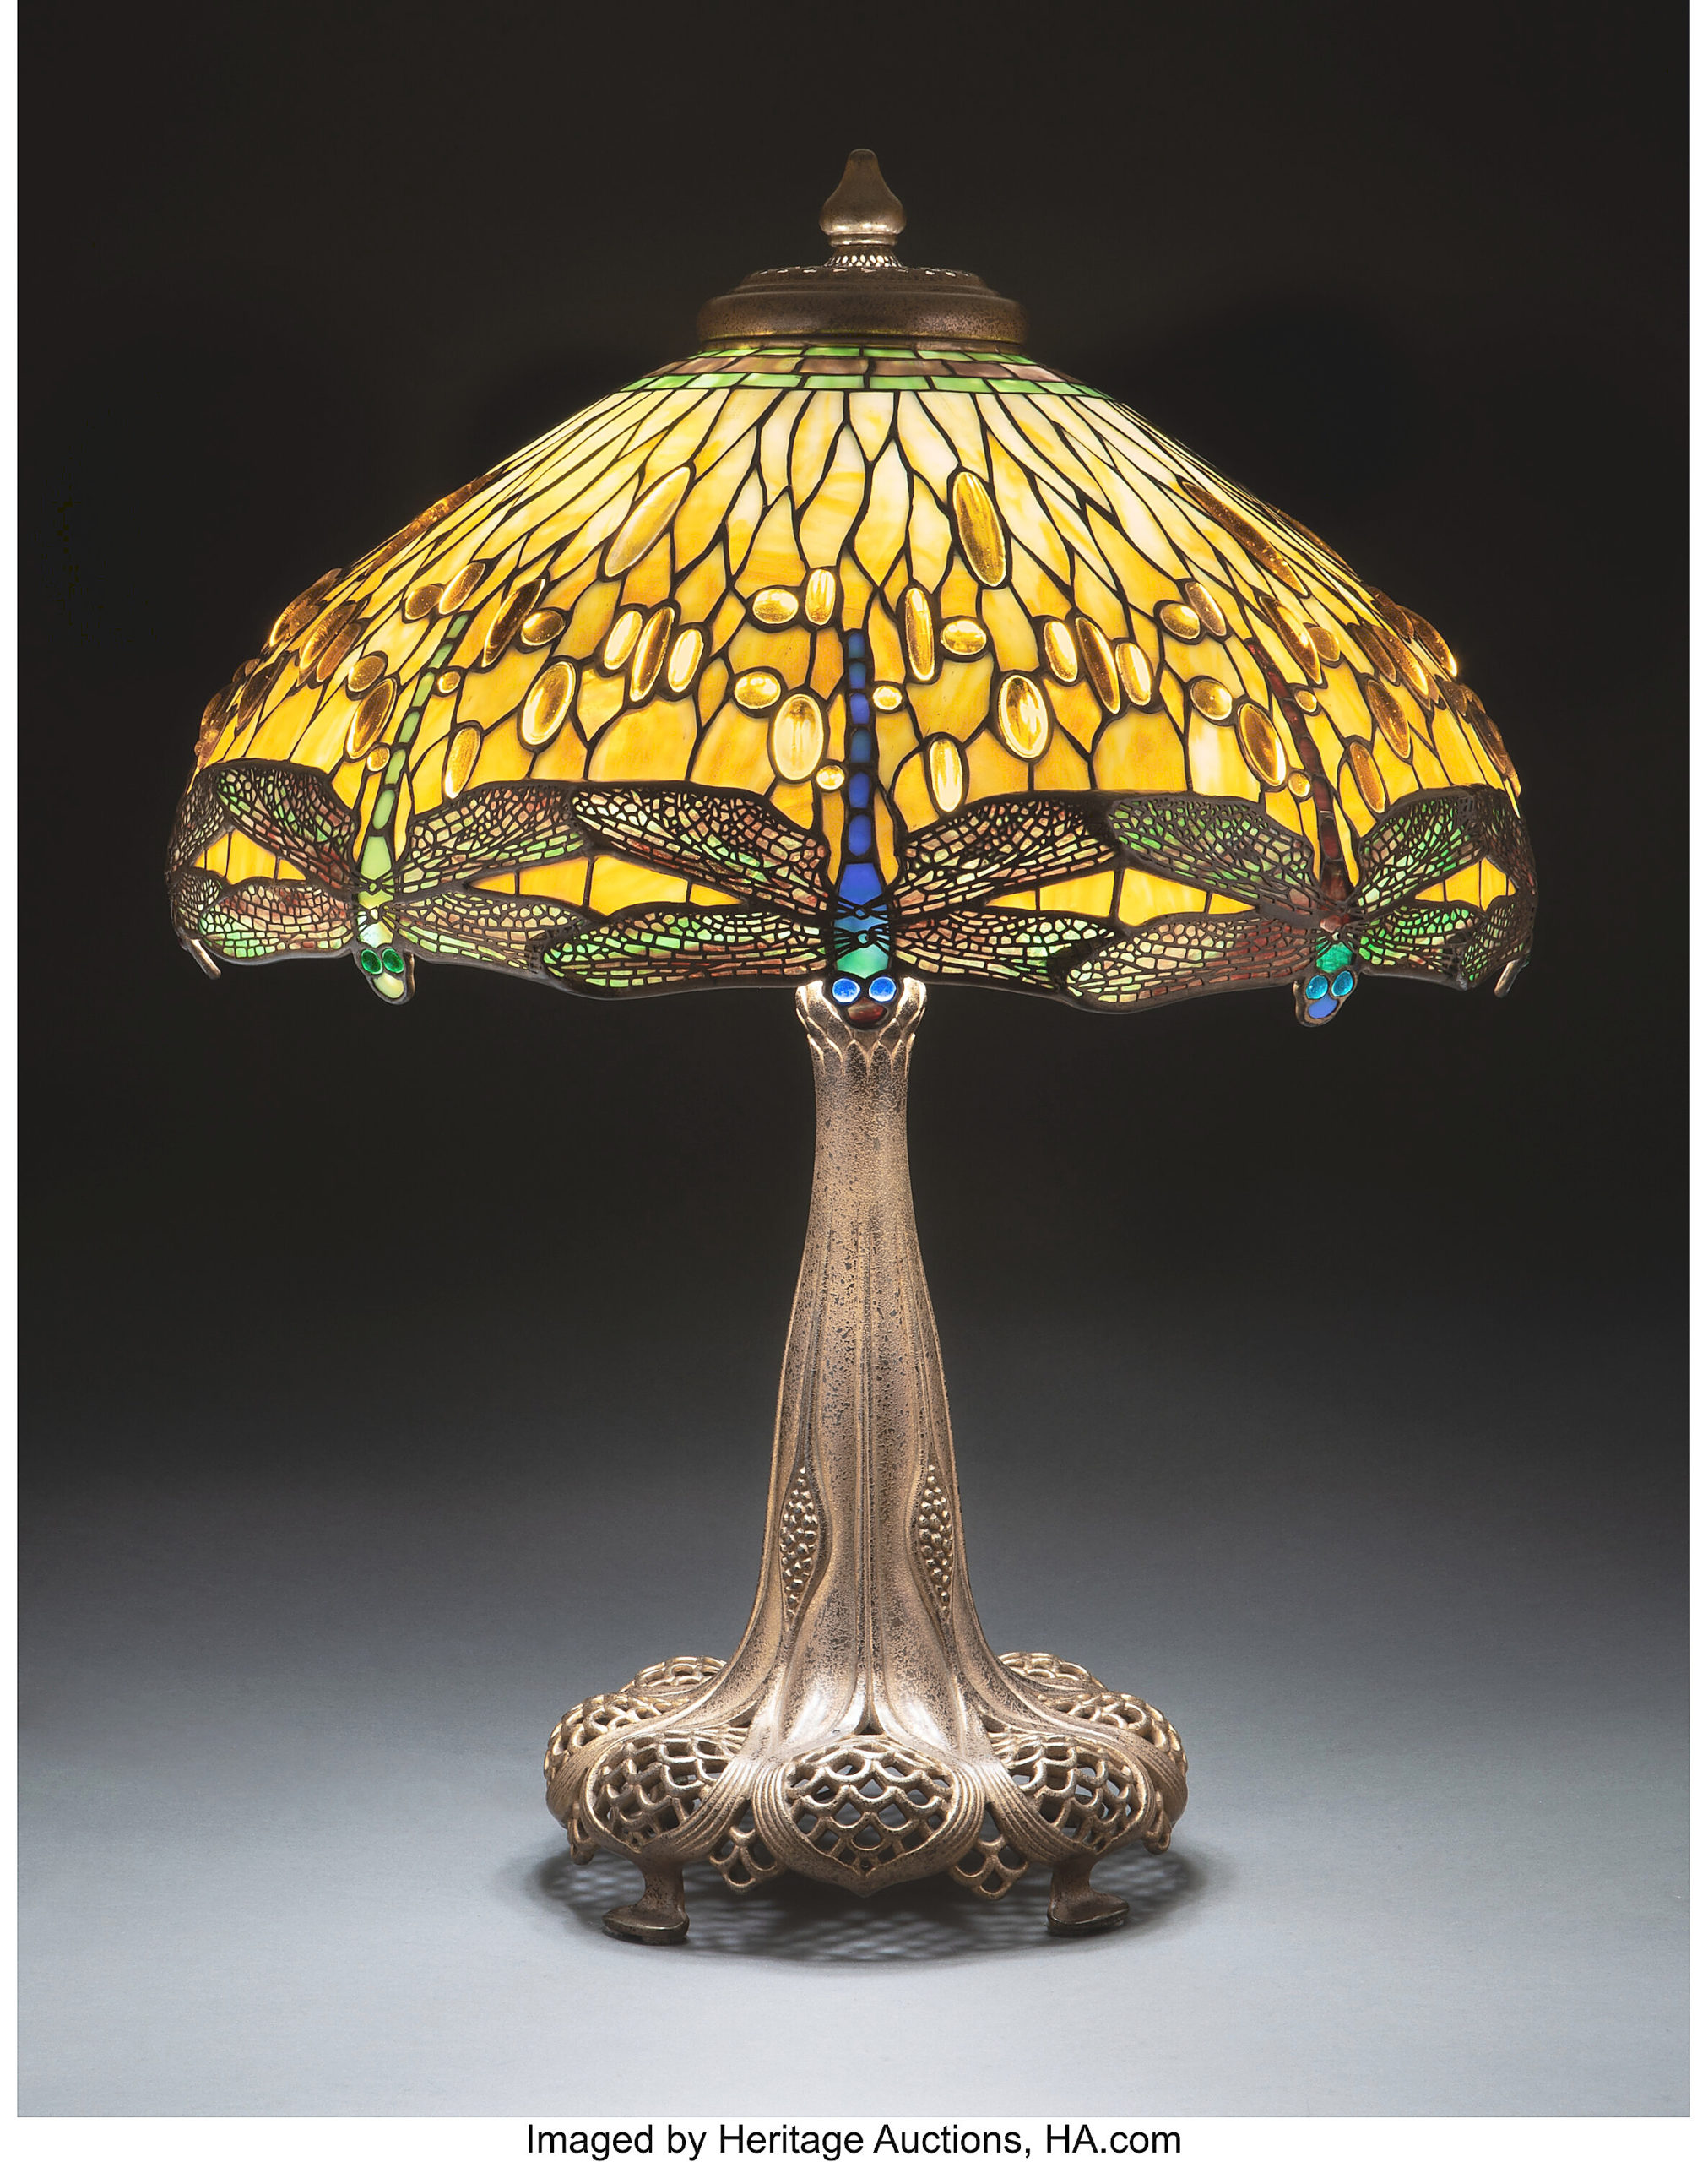 Heritage Pursues The Beauty Of Art Nouveau, Art Deco - Antiques And The  Arts WeeklyAntiques And The Arts Weekly